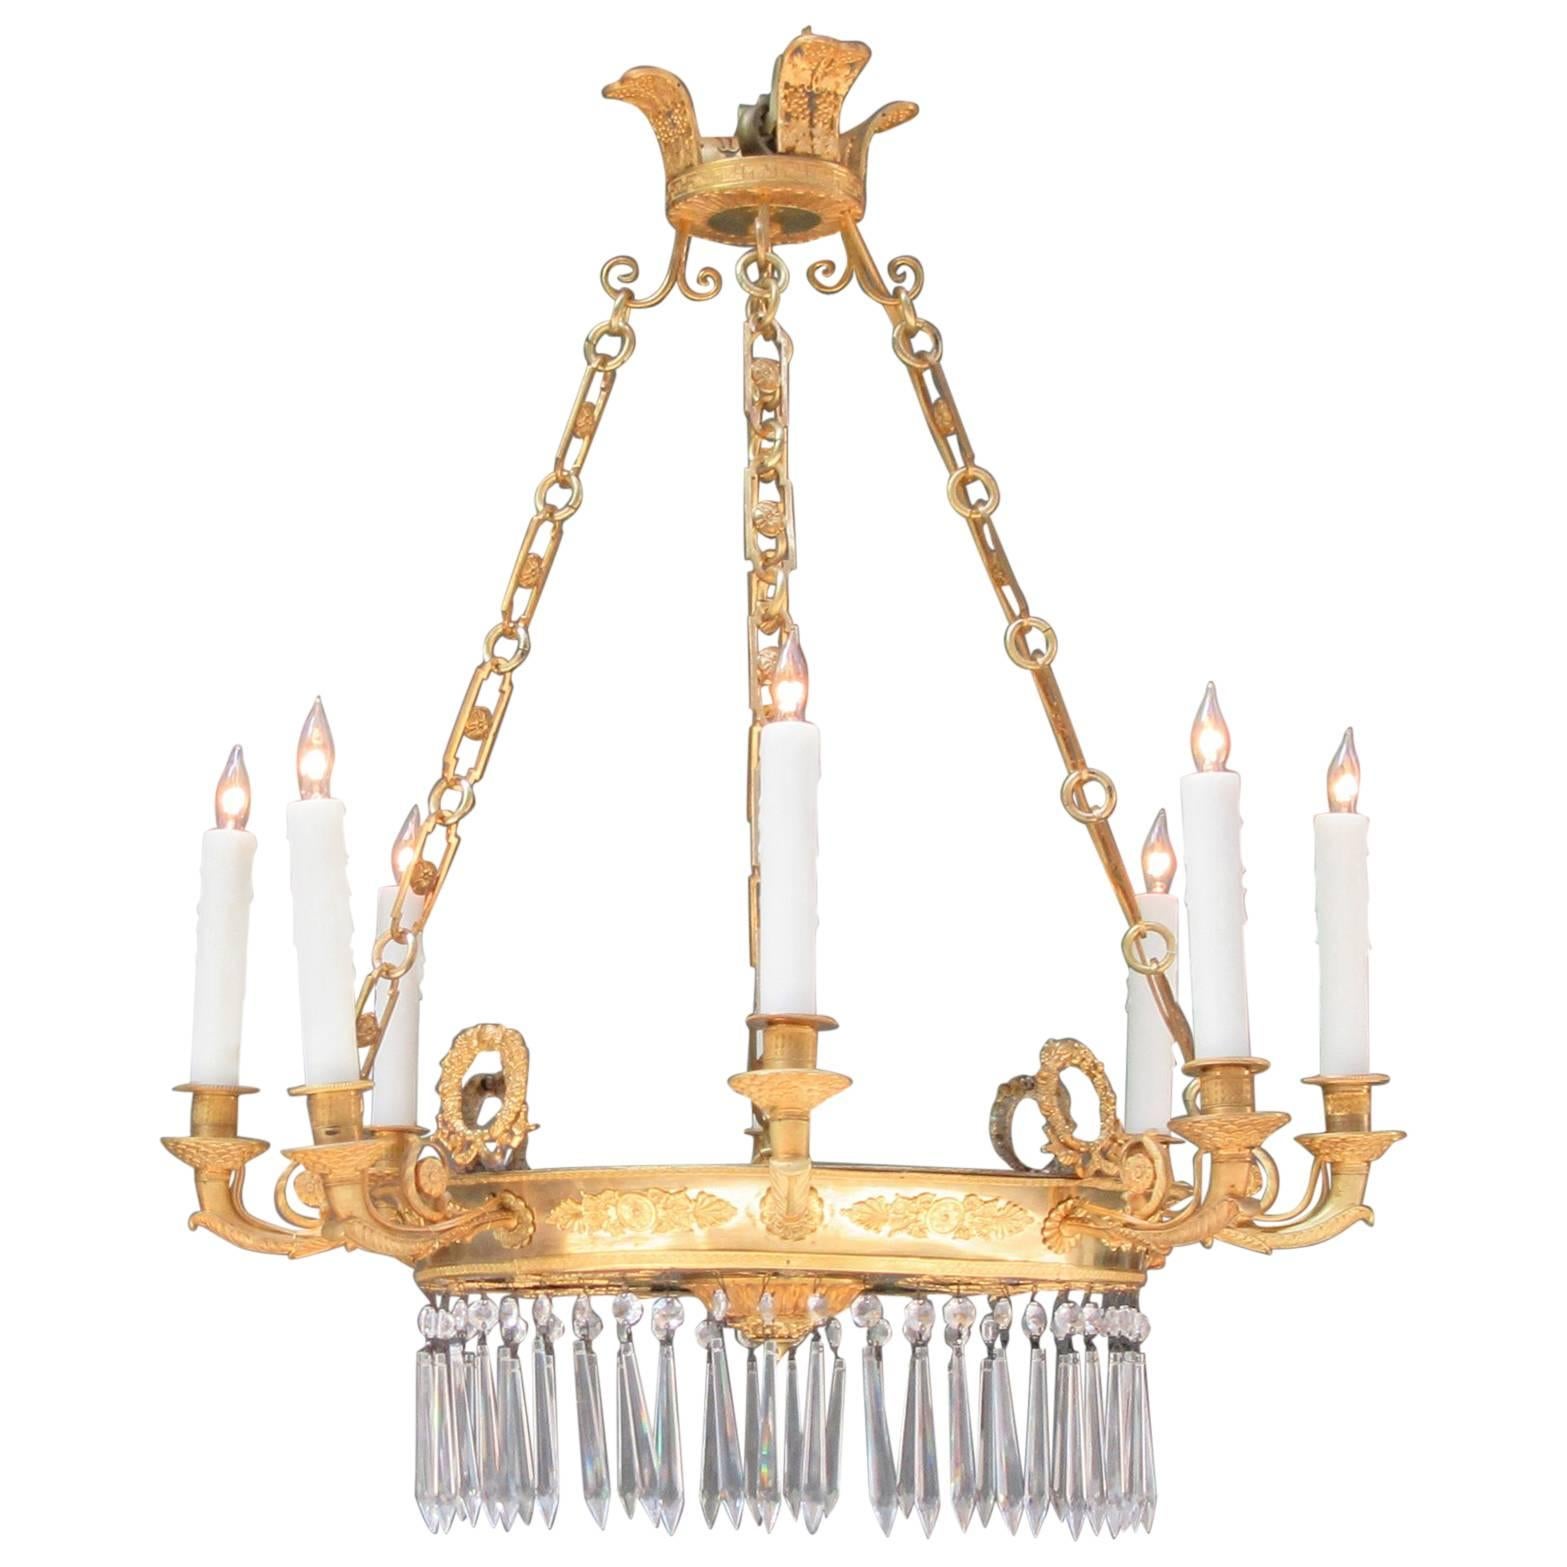 Early 19th Century French Directoire Bronze Doré, Mirror and Crystal Chandelier